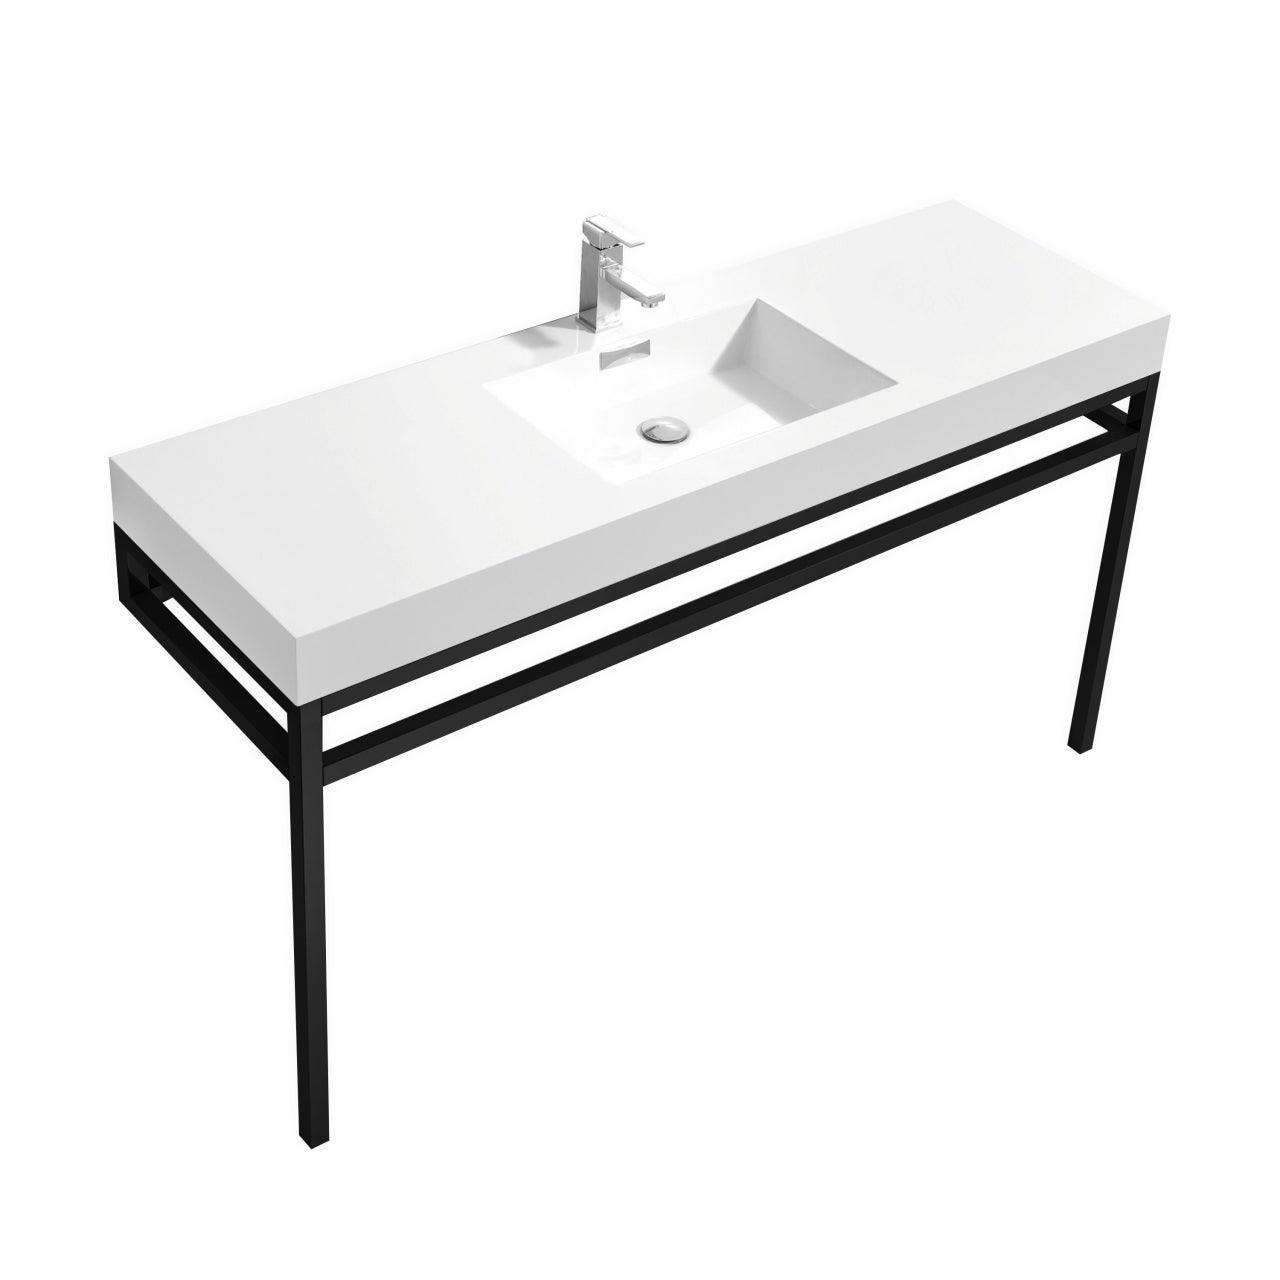 Haus 60" Single Sink Stainless Steel Console w/ White Acrylic Sink - Home and Bath Depot